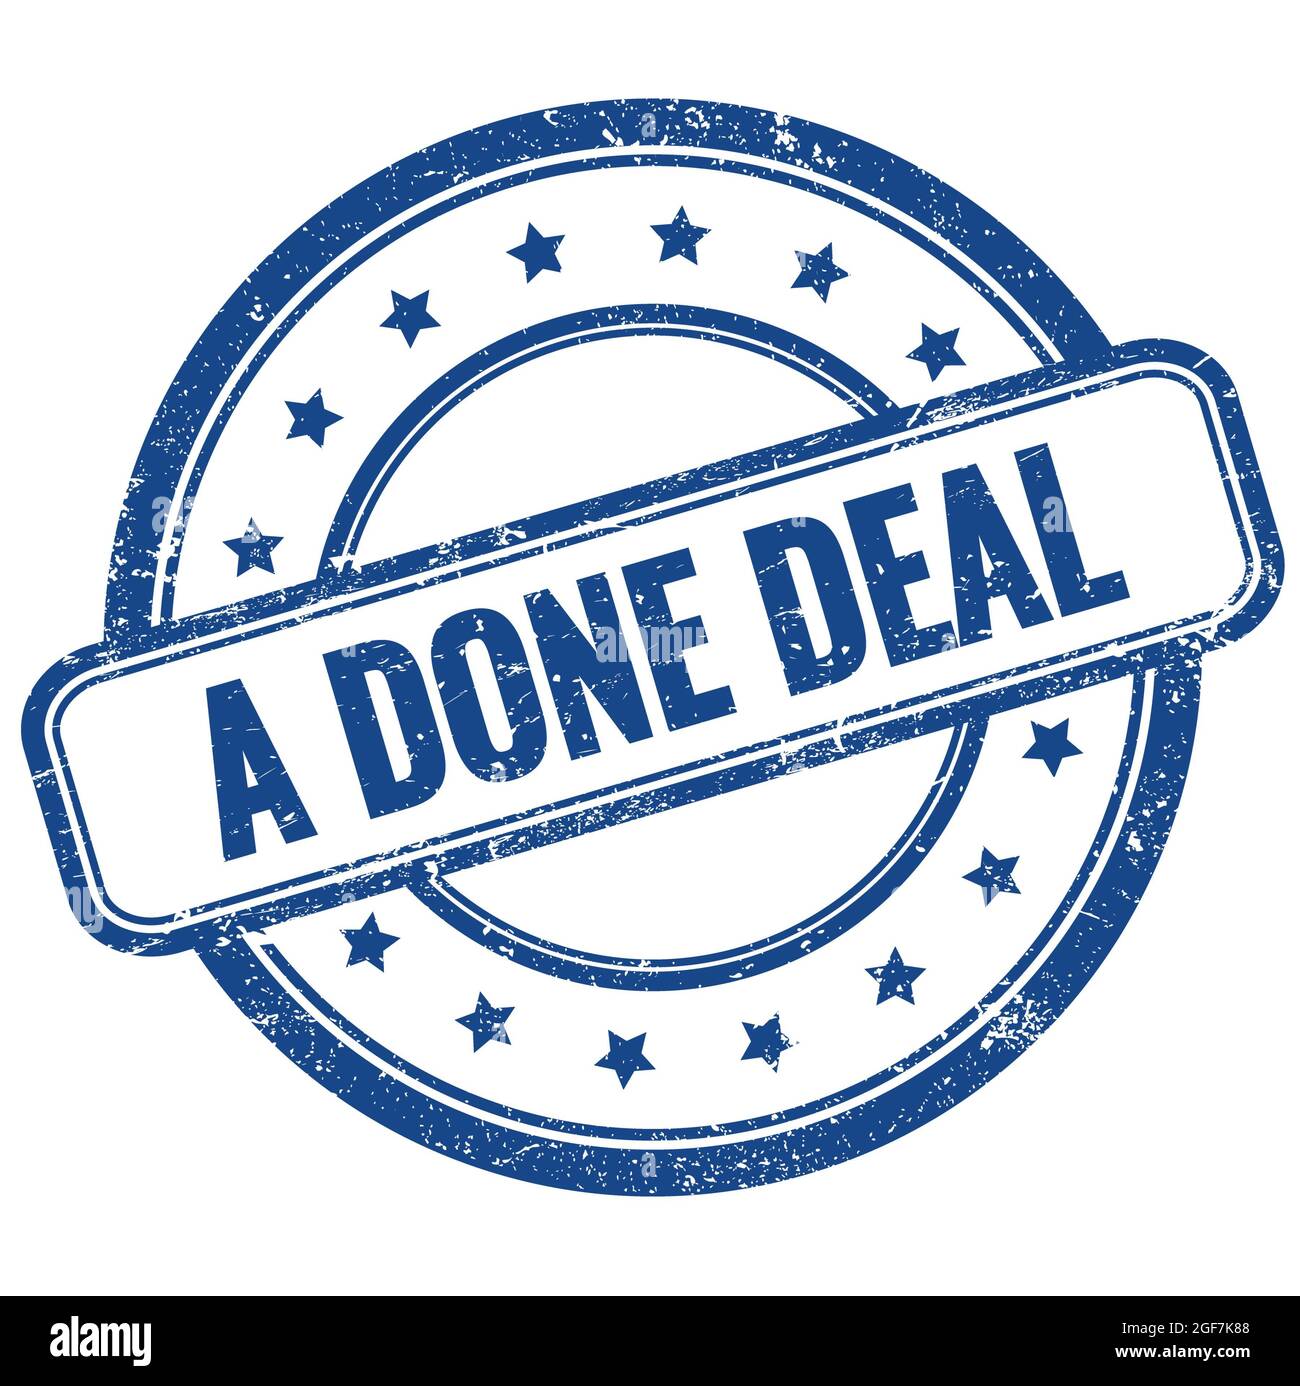 A DONE DEAL text on blue vintage grungy round rubber stamp. Stock Photo